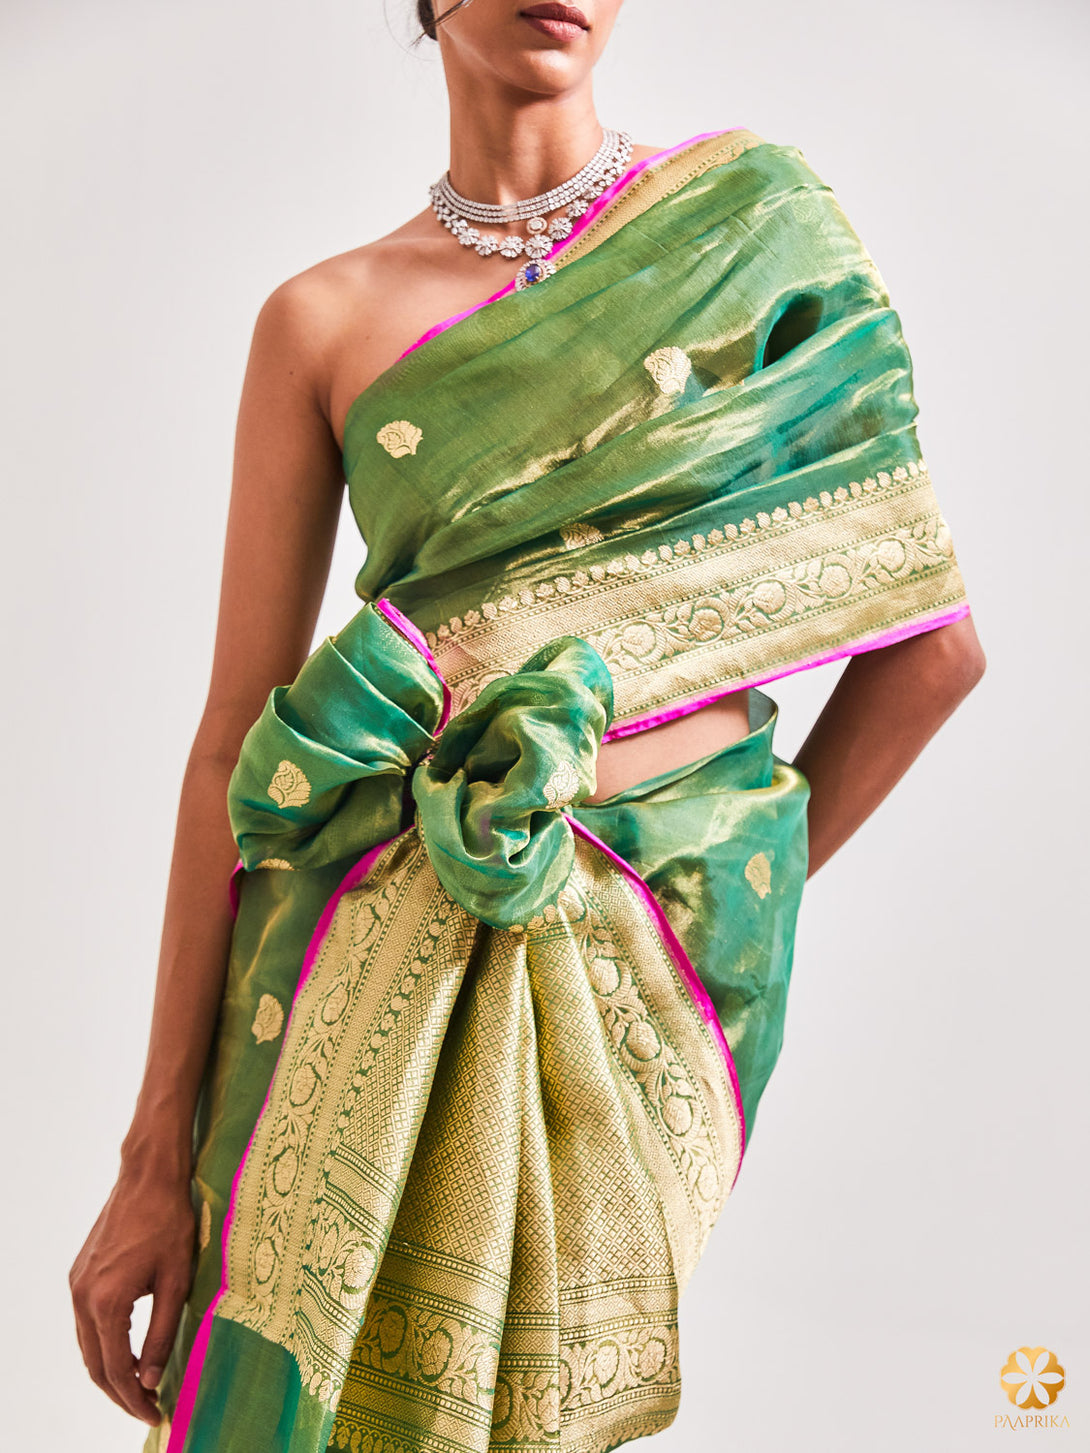 A Stylish Woman Wearing Exquisite Bottle Green and Gold Handwoven Tissue Saree - Effortless Elegance and Vibrancy.